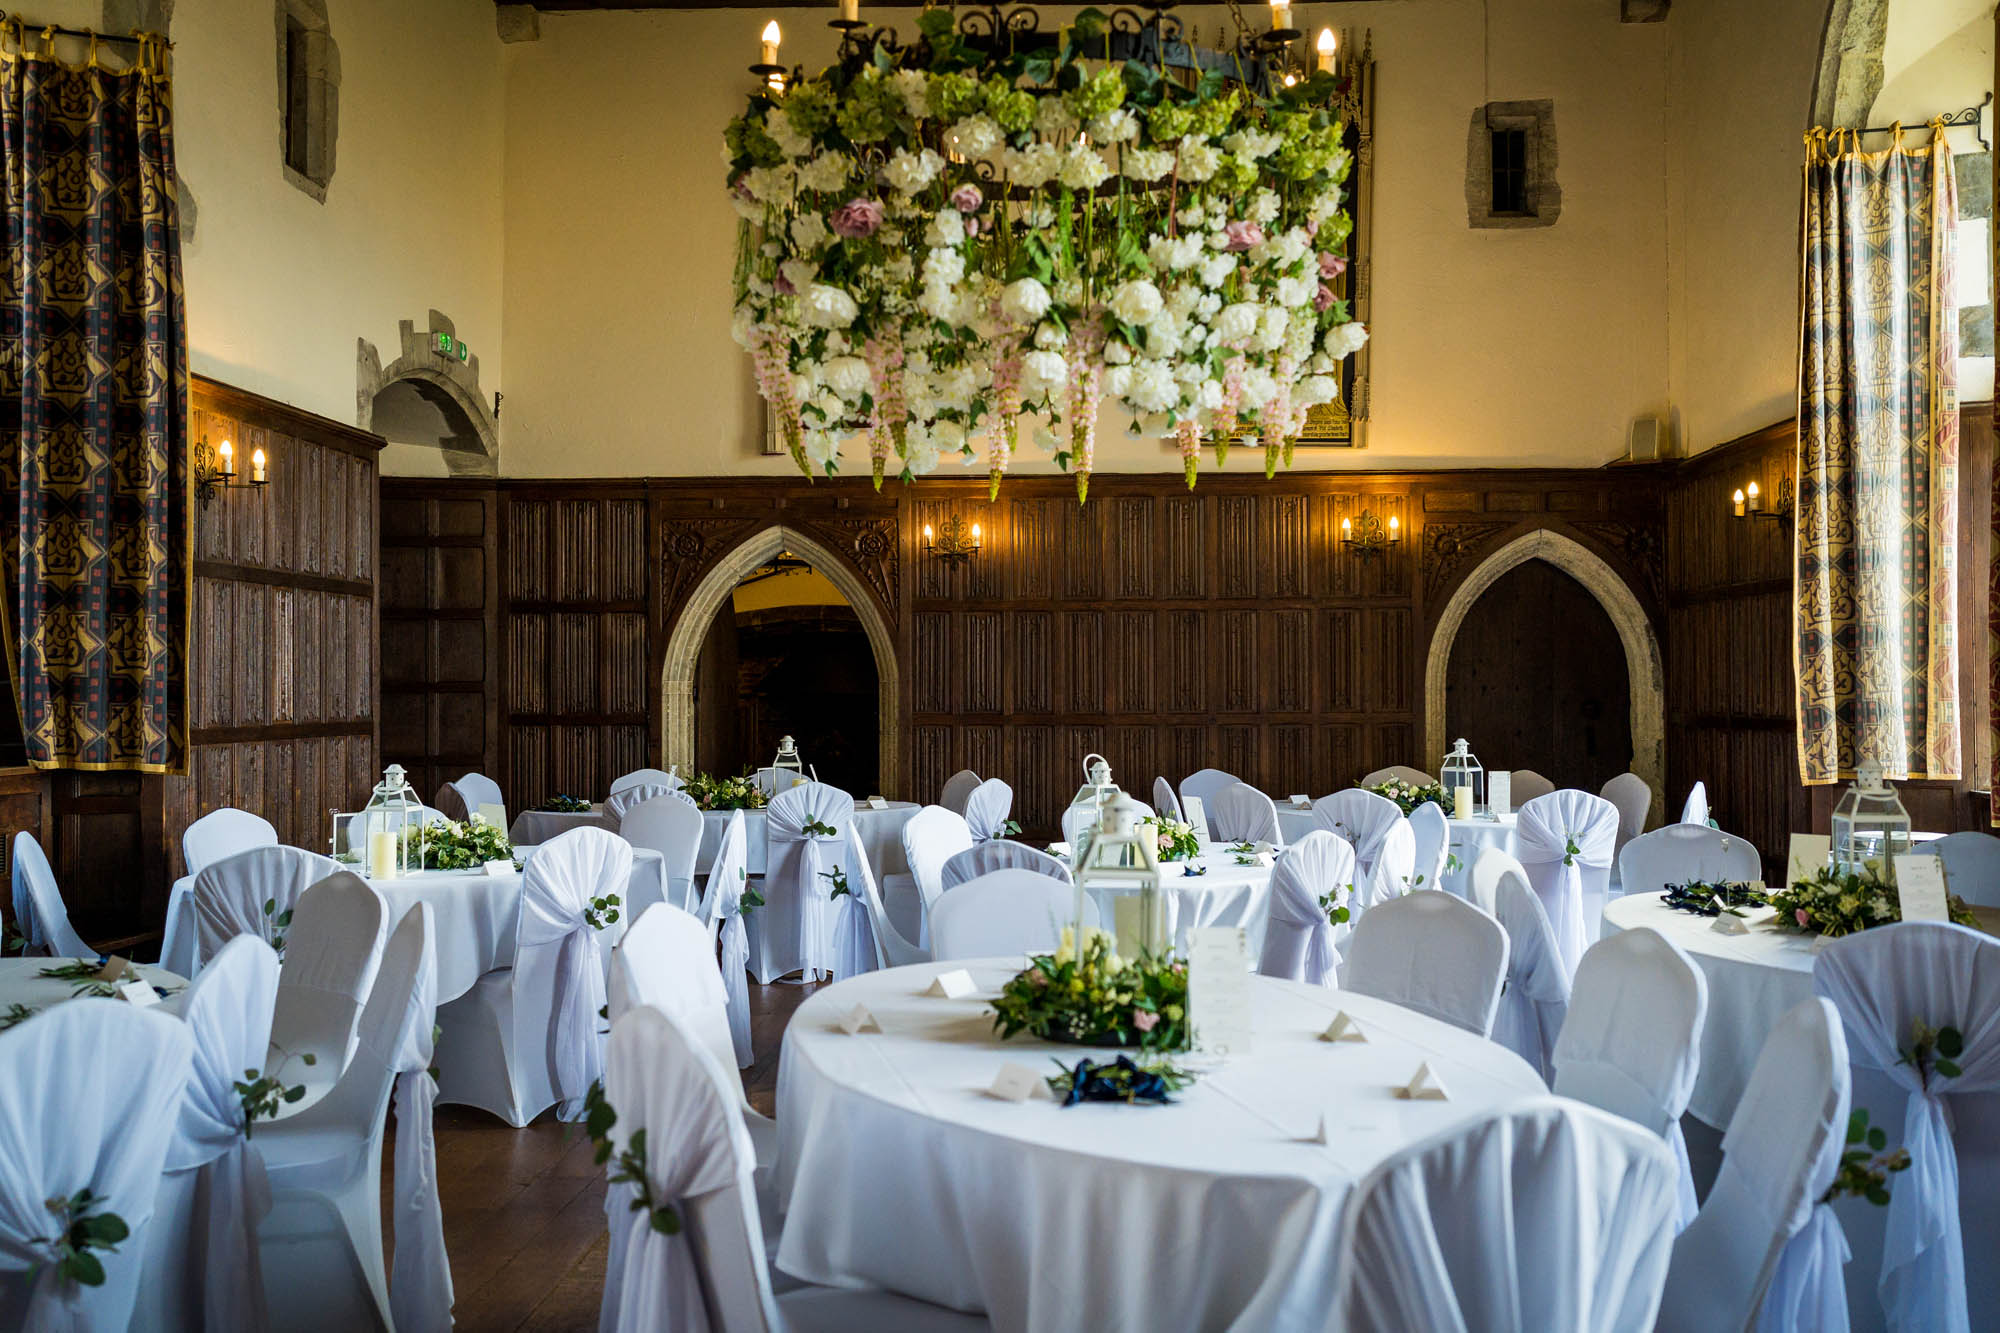 Lizzy and Rich getting married at Lympne Castle in Kent, captured by Benjamin Toms Photography